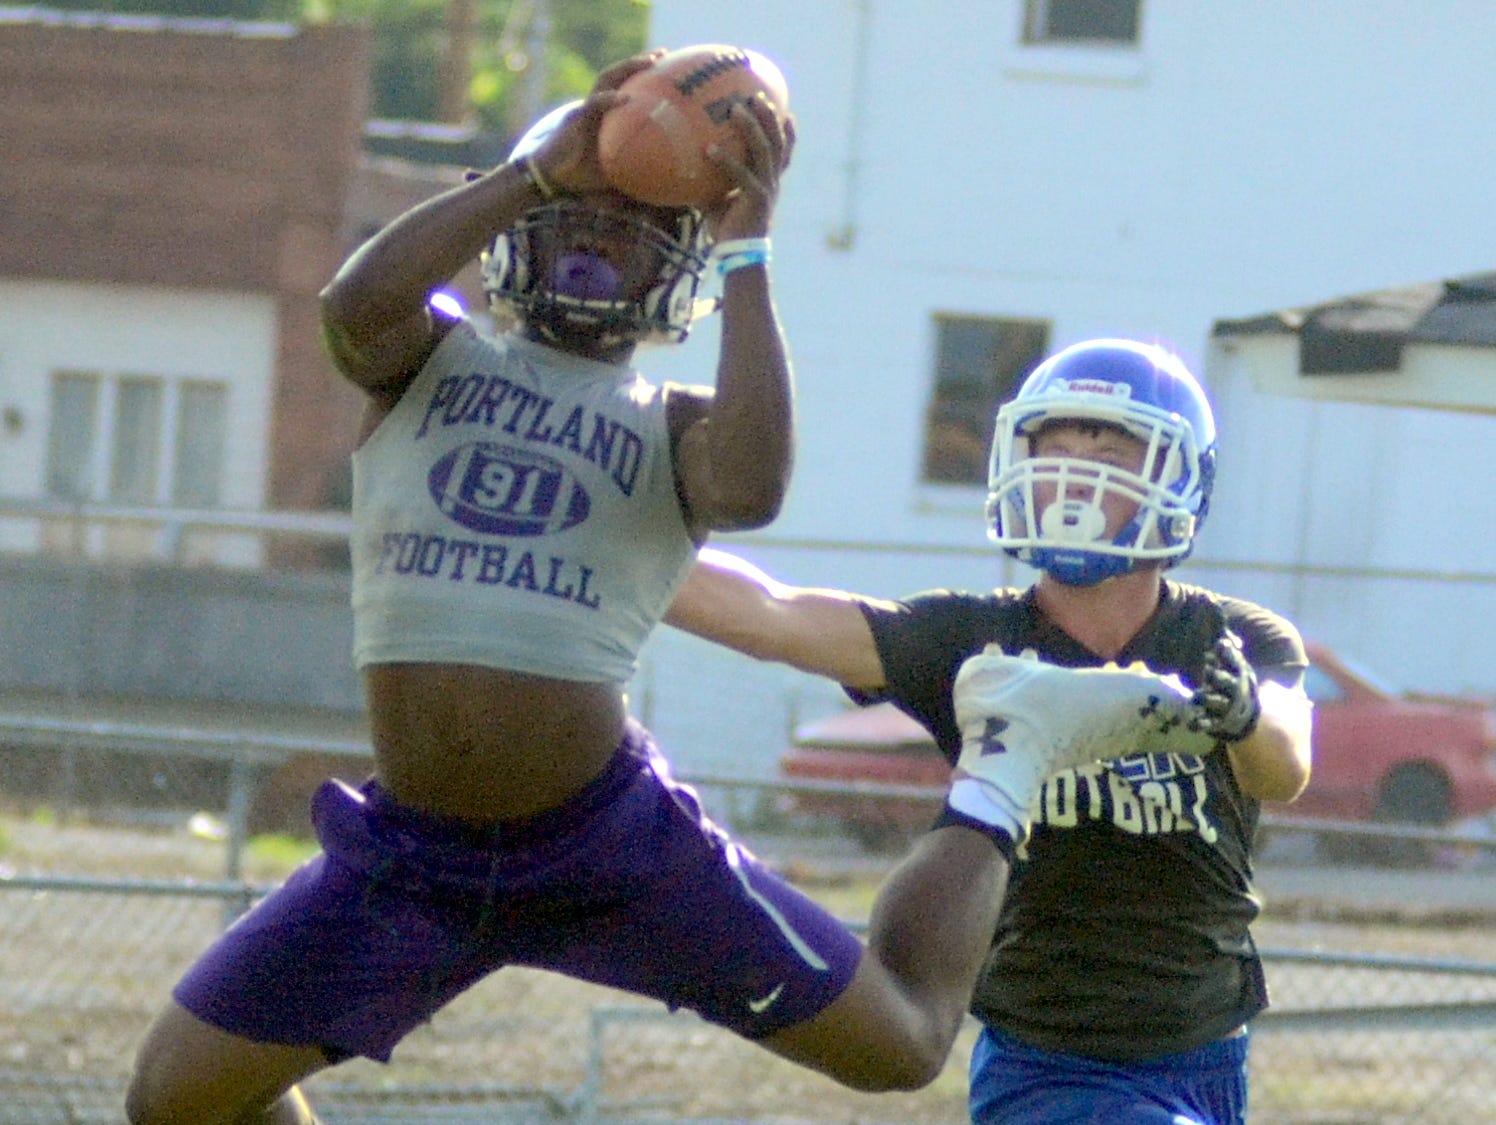 Portland High senior Emmanuel Johnson leaps to catch a pass against Macon County during Trousdale County’s 7-on-7 workouts on Tuesday afternoon.